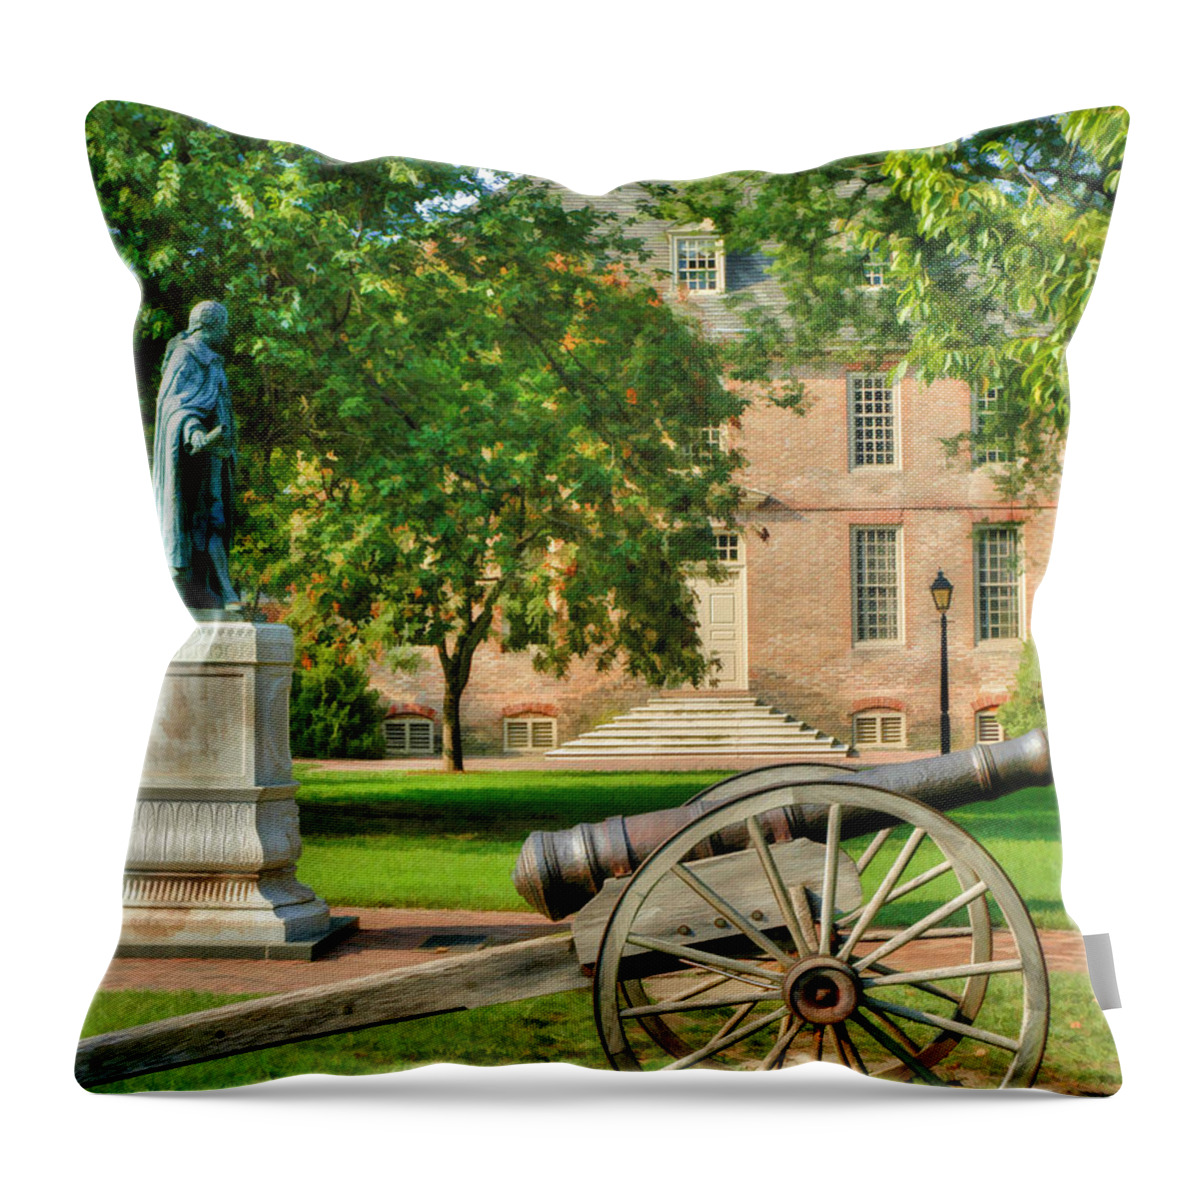 Historic Throw Pillow featuring the photograph Williamsburg Cannon by Sam Davis Johnson